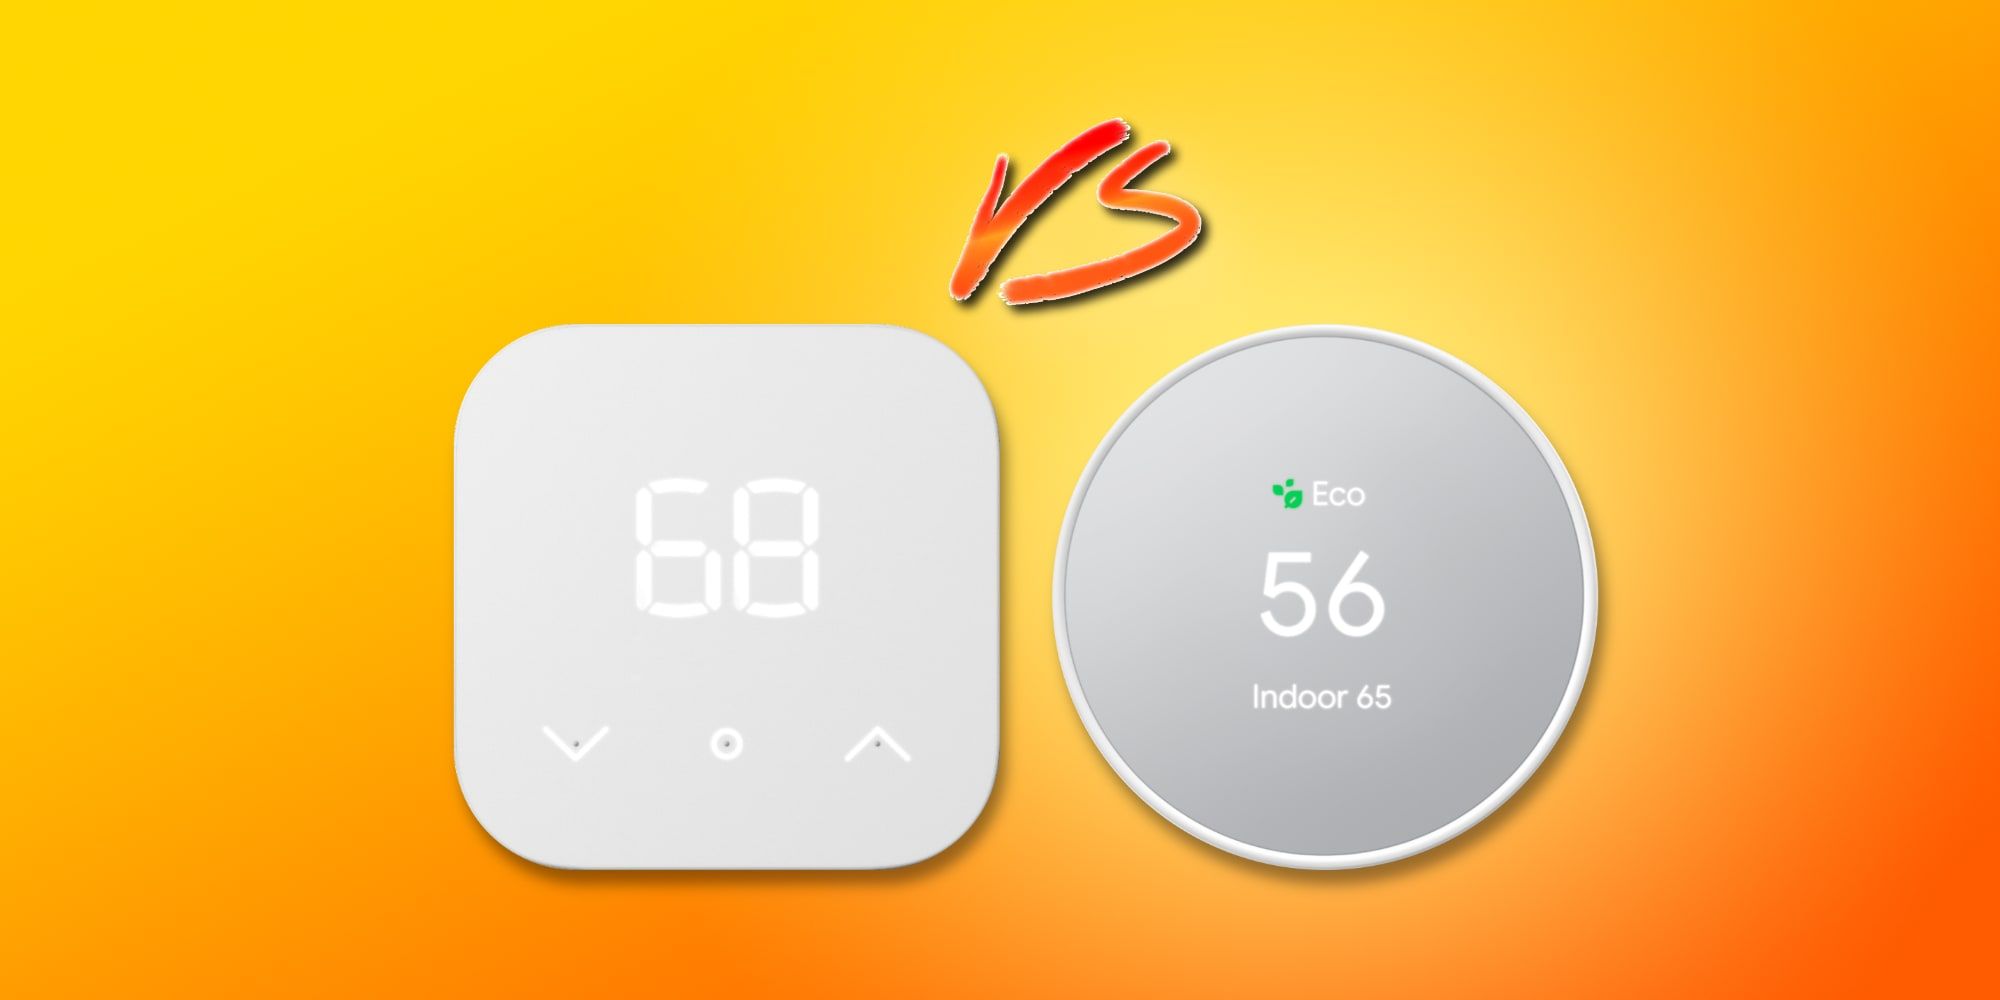 Amazon Smart Thermostat Vs Nest Thermostat Is Googles Worth $70 More